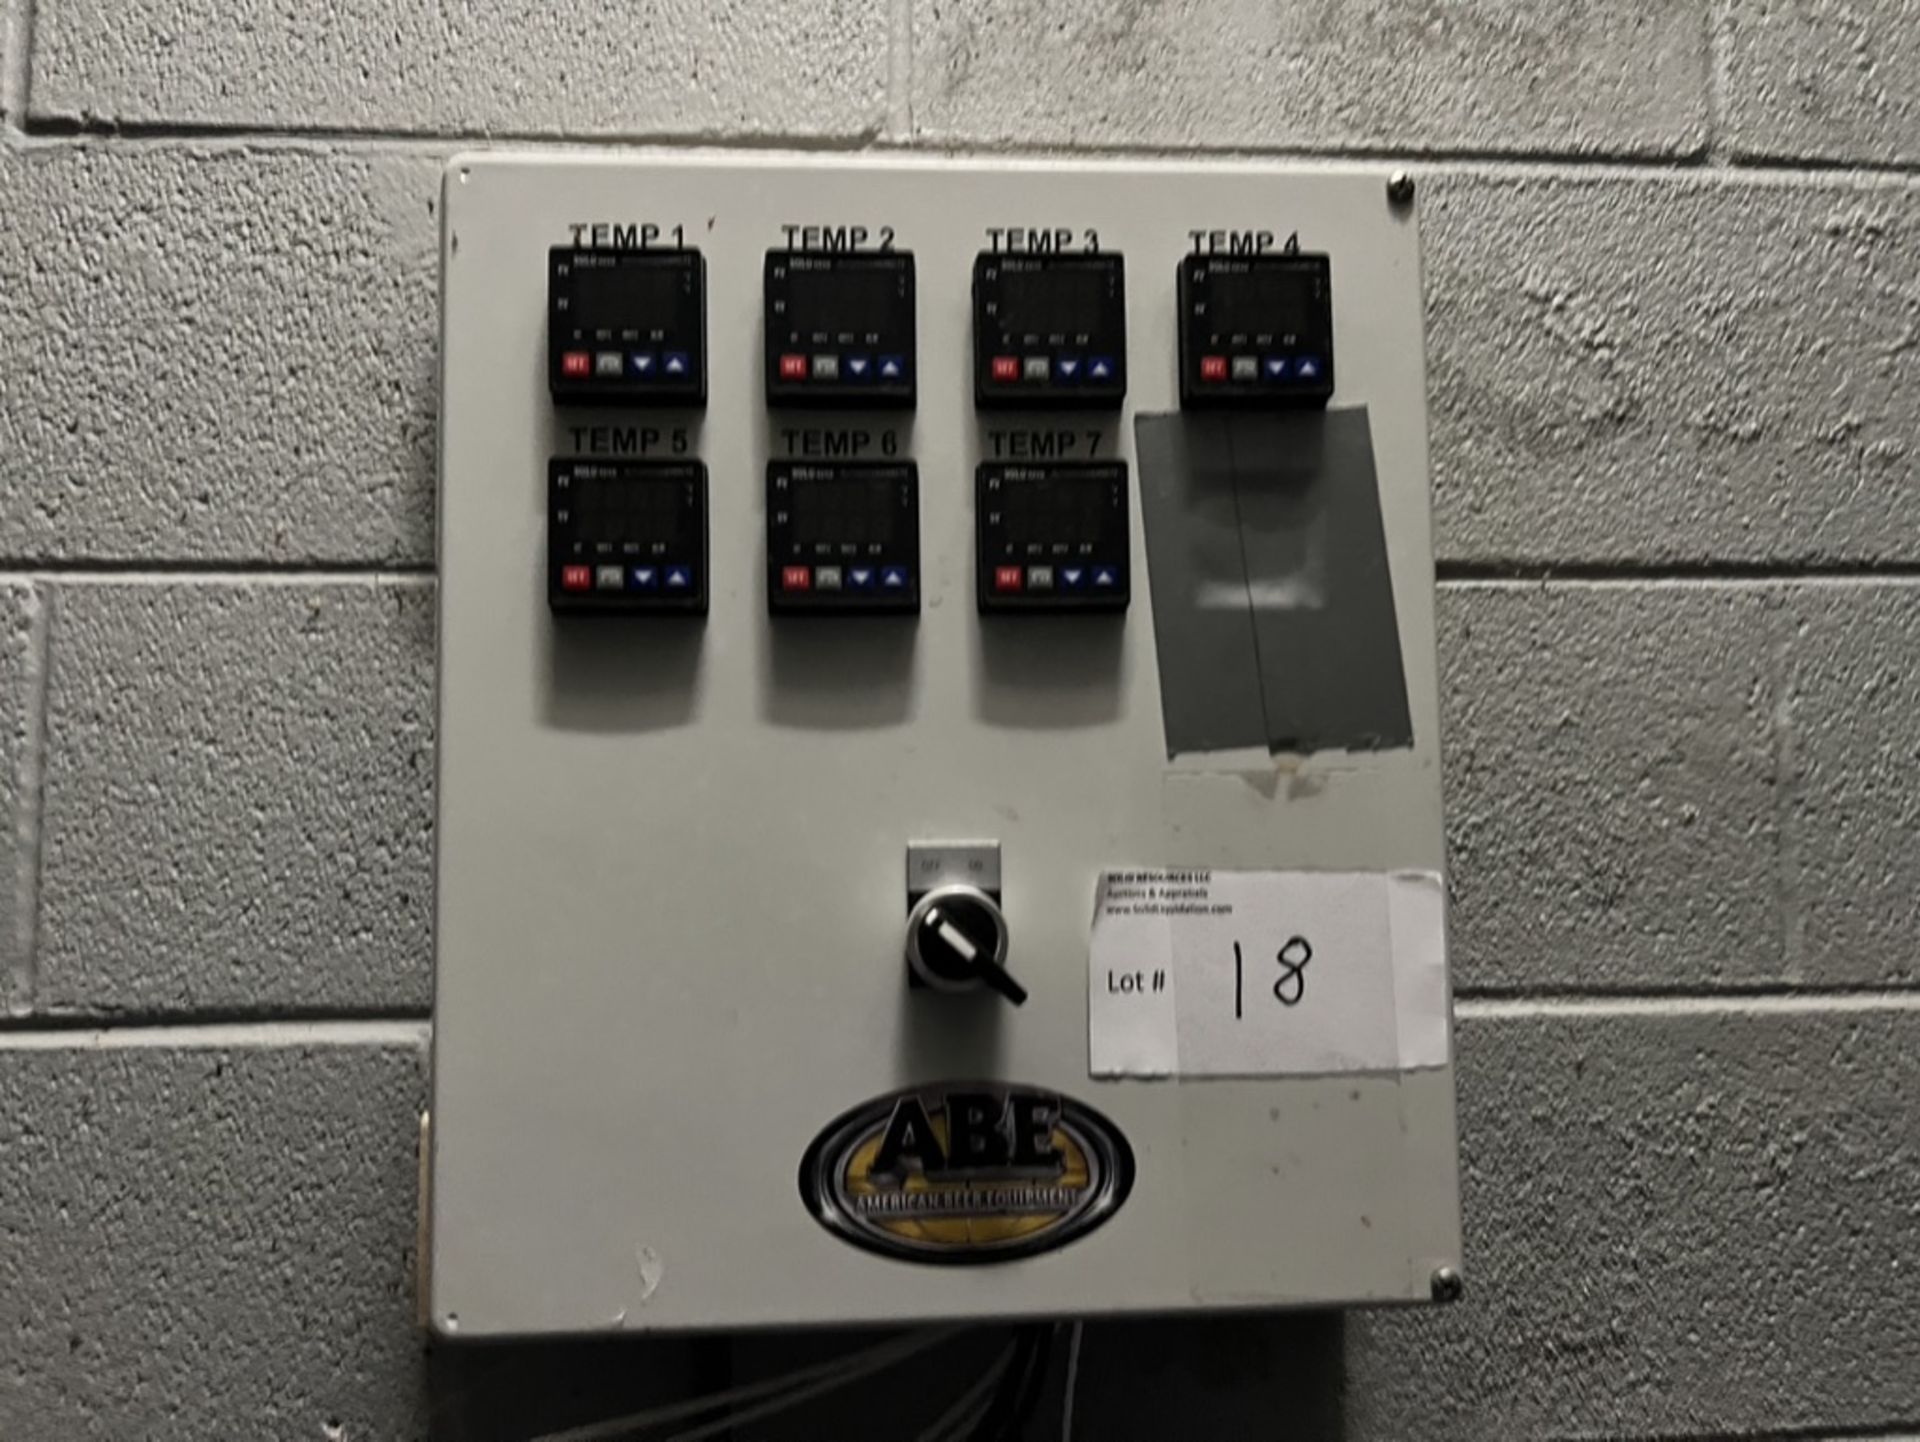 ABE TEMPERATURE CONTROL PANEL W/ APPROXIMATELY (4) TEMPERATURE PROBES